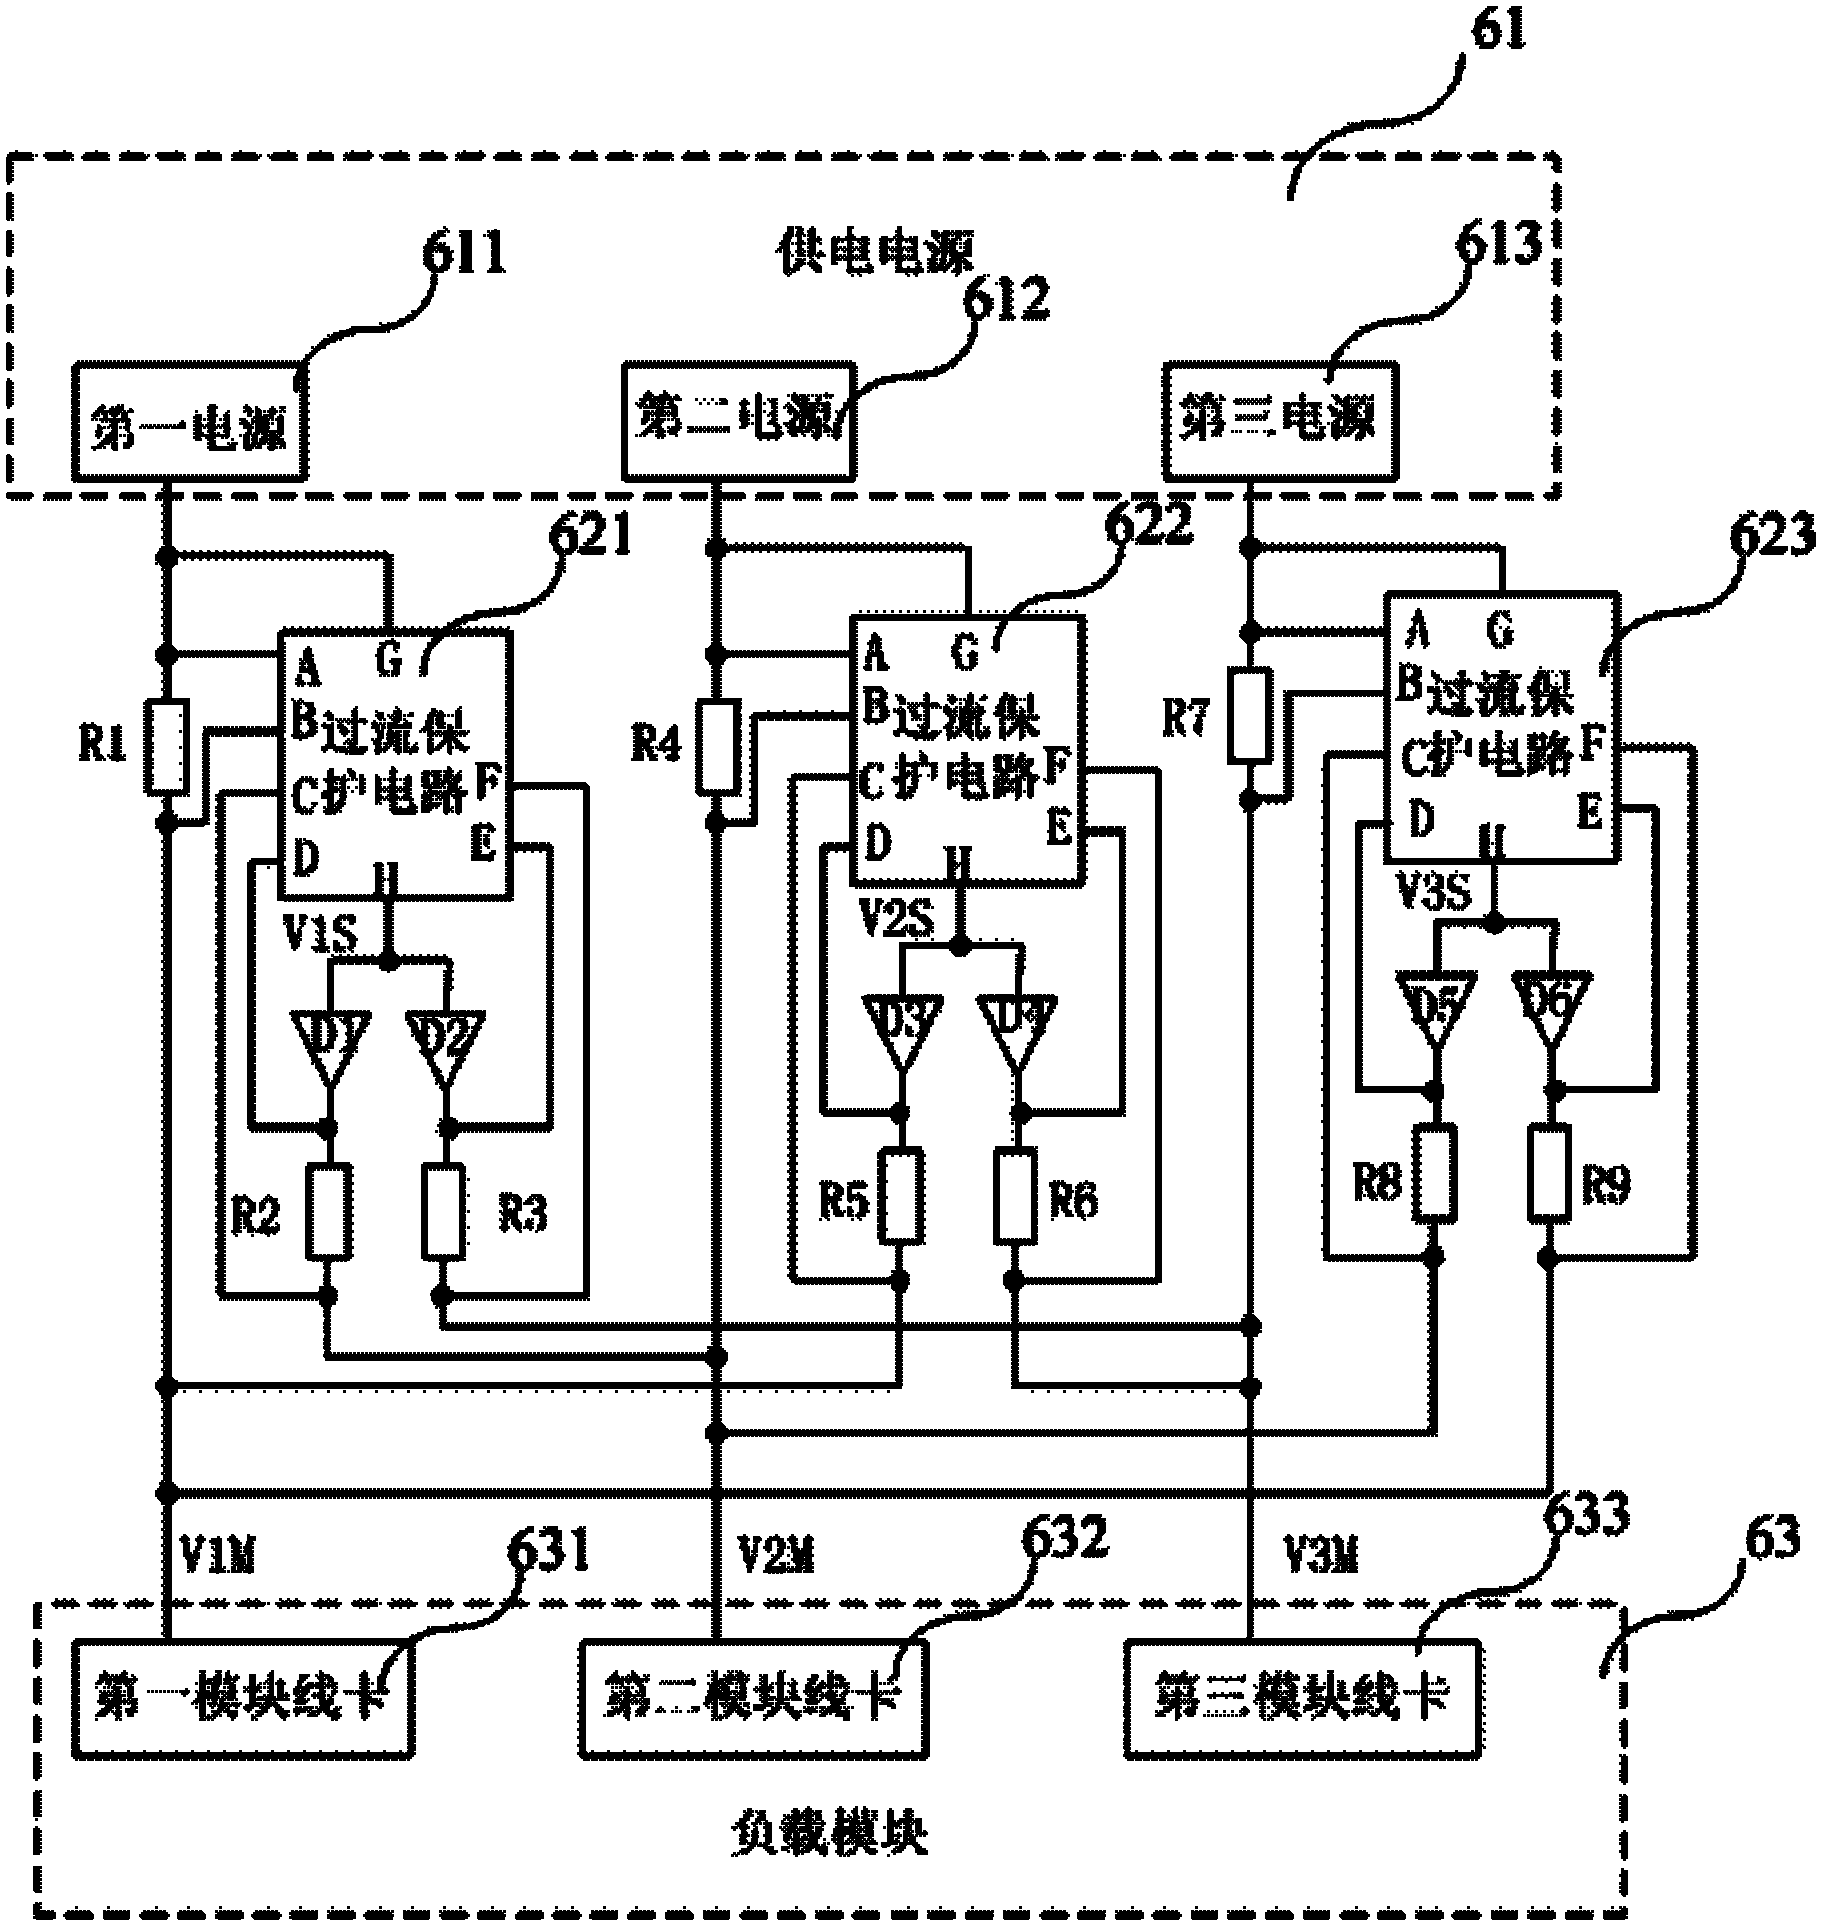 Multi-power supply control devices and system thereof